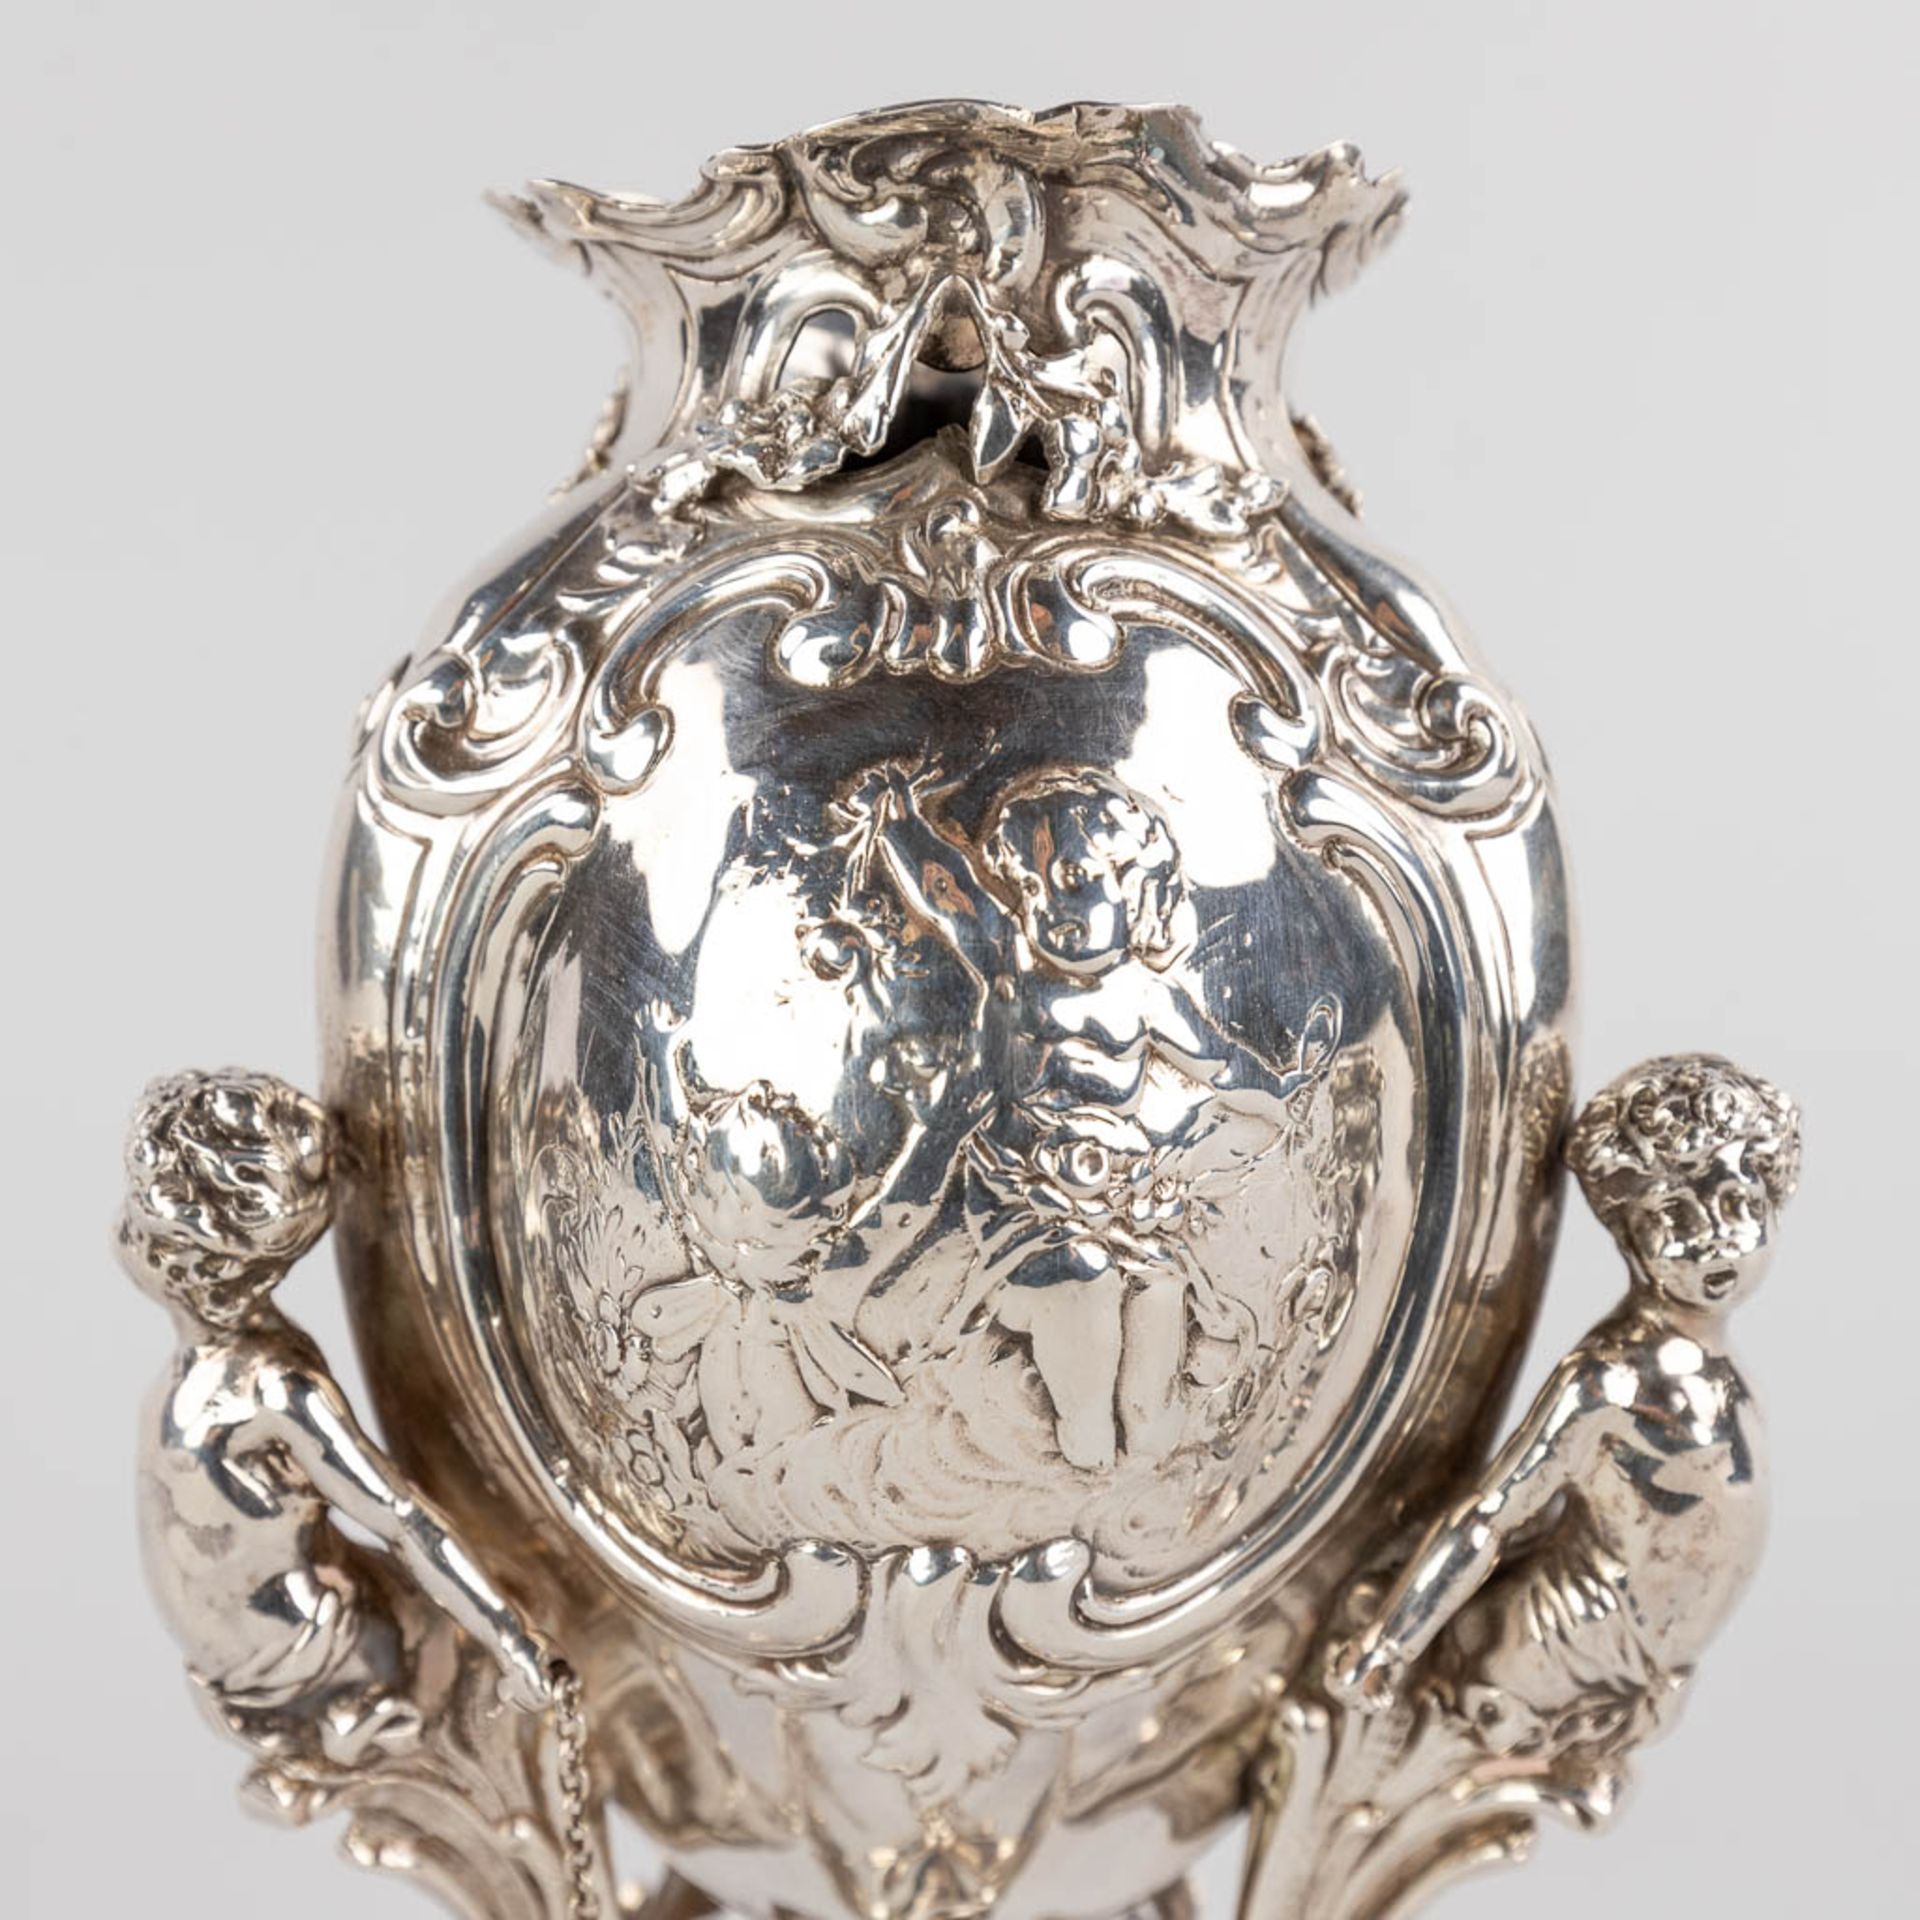 A fine vase, silver in Louis XV style, mounted with 3 putto. 427g. 1906. (D:11 x W:11 x H:20 cm) - Image 10 of 12